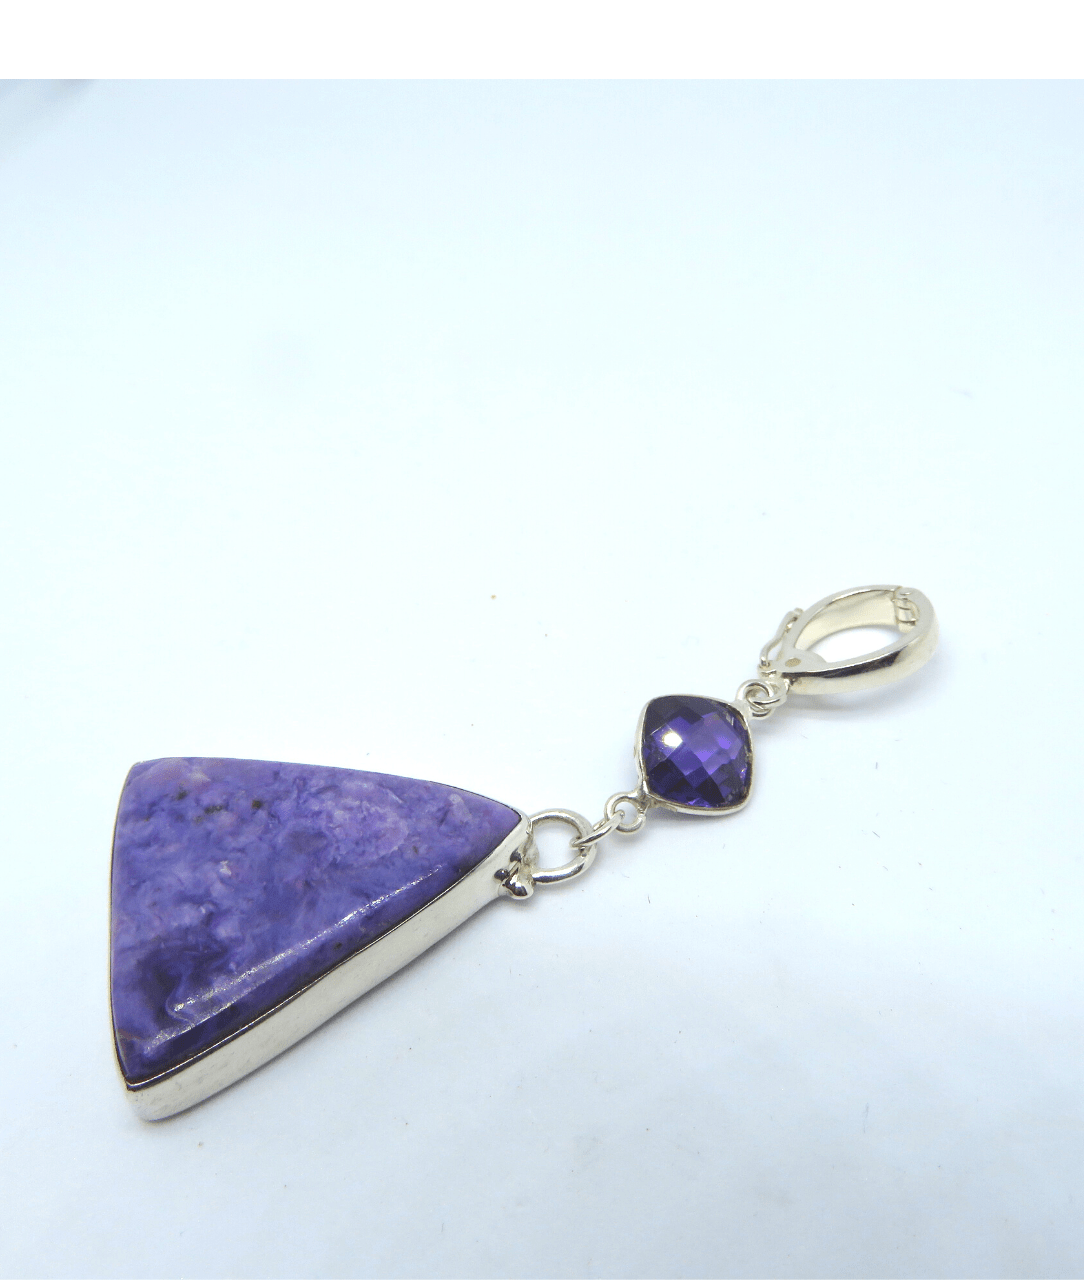 Rare Charoite Large Triangle-shaped, and Checkerboard Faceted Amethyst Sterling Silver Enhancer Pendant Approx. 2 1/4"L X 7/8"W. ONE ONLY.